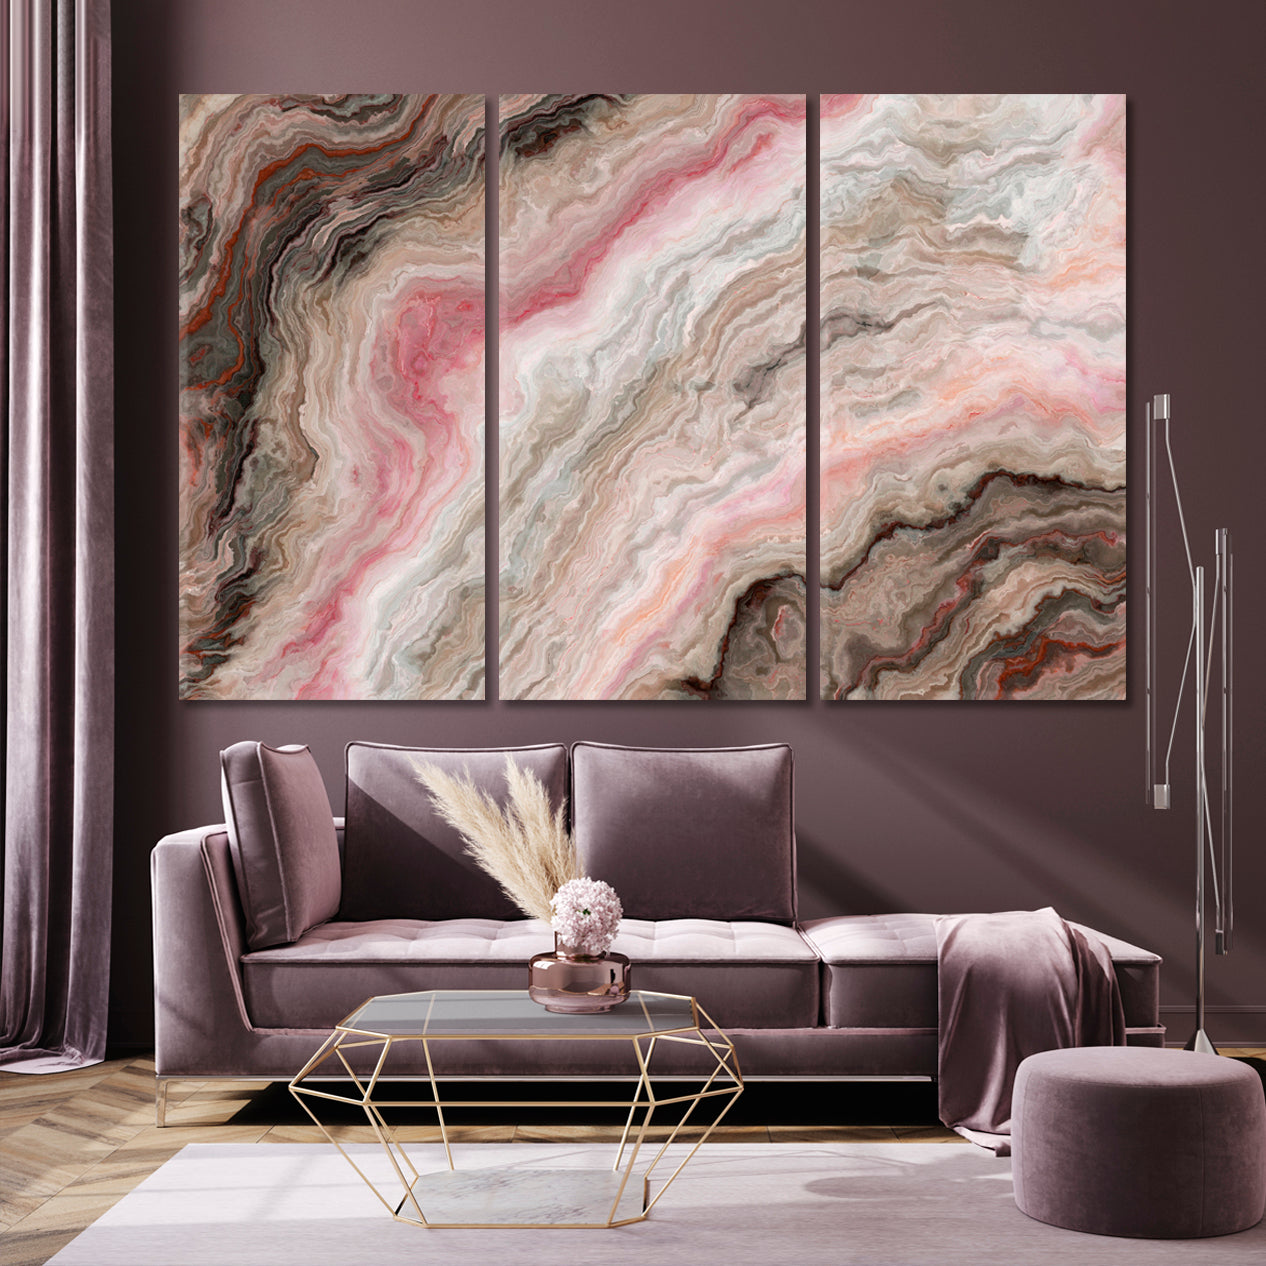 MARBLE Abstract Onyx Rose Inclusions Wavy Pattern Natural Beauty Fluid Art, Oriental Marbling Canvas Print Artesty 3 panels 36" x 24" 